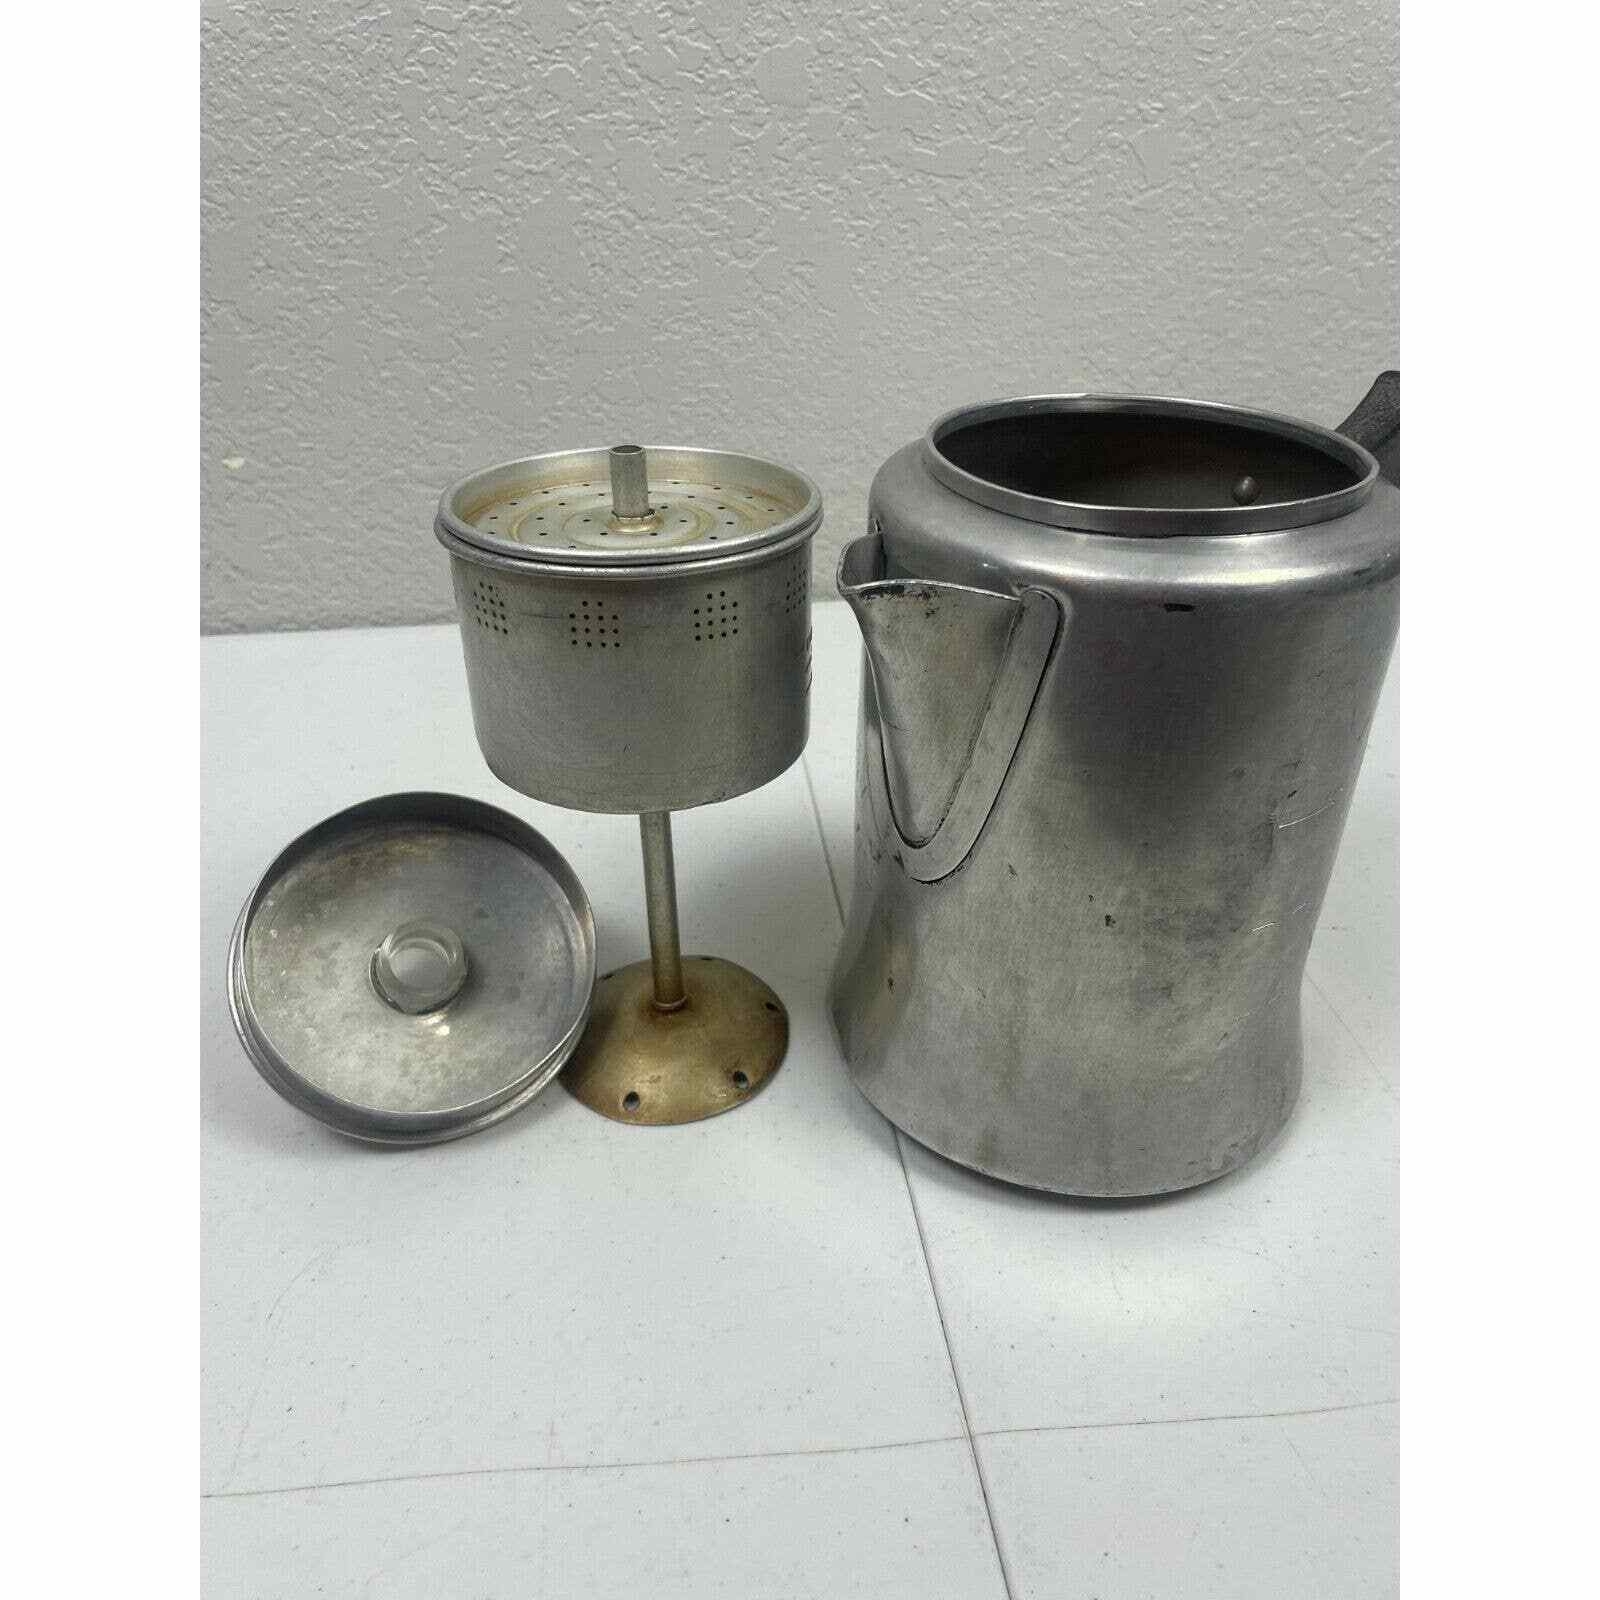 Aluminum coffee filter and kettle